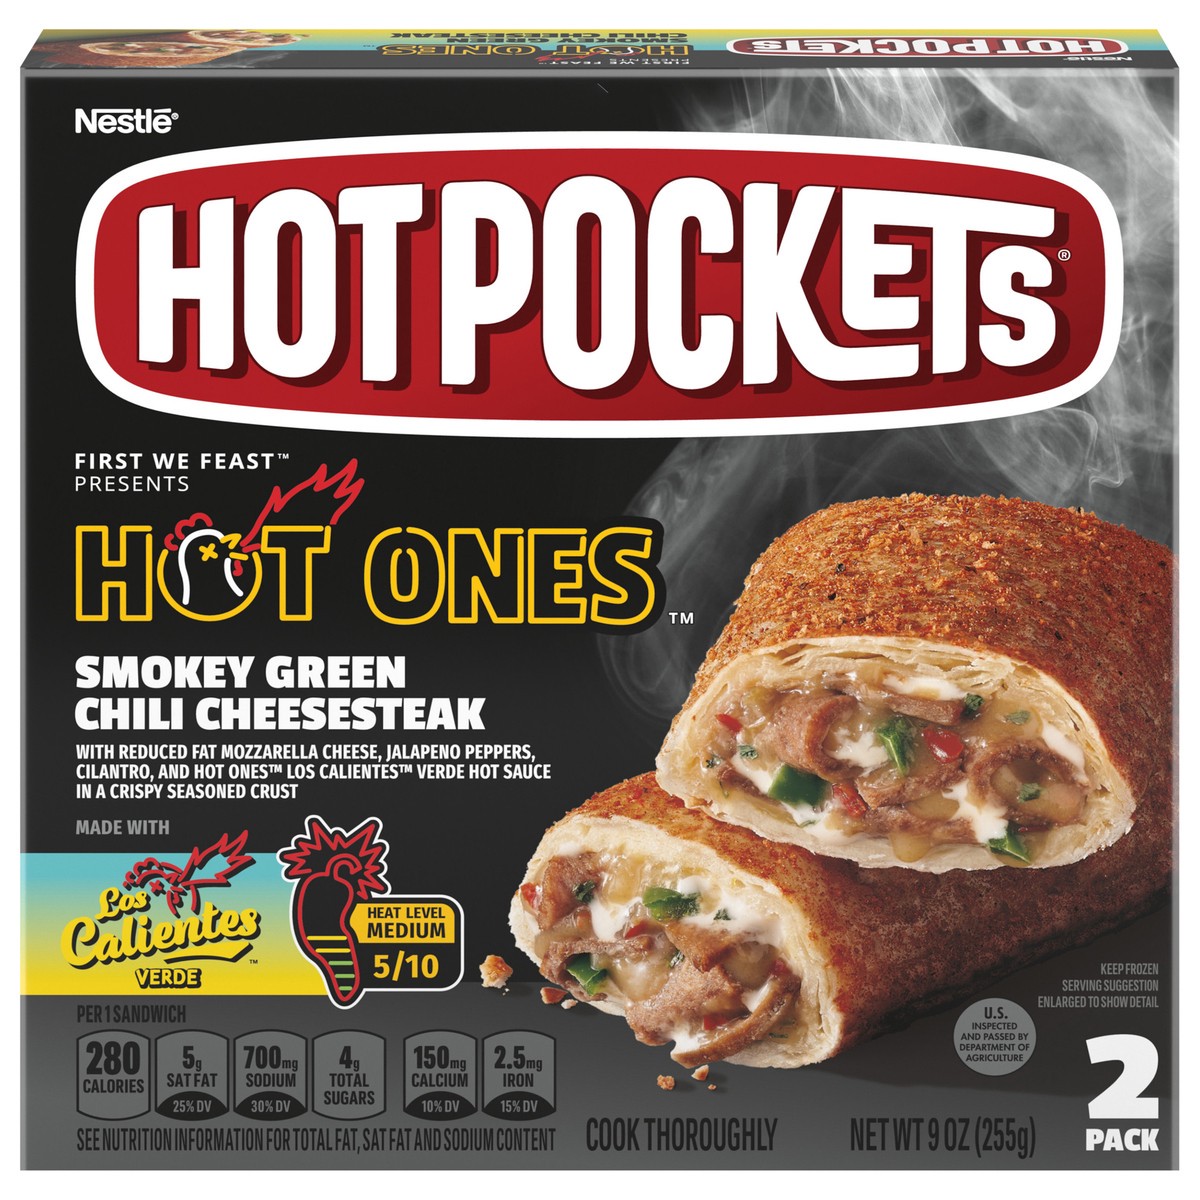 slide 1 of 9, Hot Pockets Hot Ones Smokey Green Chili Cheesesteak Frozen Snacks in a Crispy Buttery Crust, Steak and Cheese Sandwiches Made with Real Cheddar Cheese, 2 Count Frozen Sandwiches, 2 ct